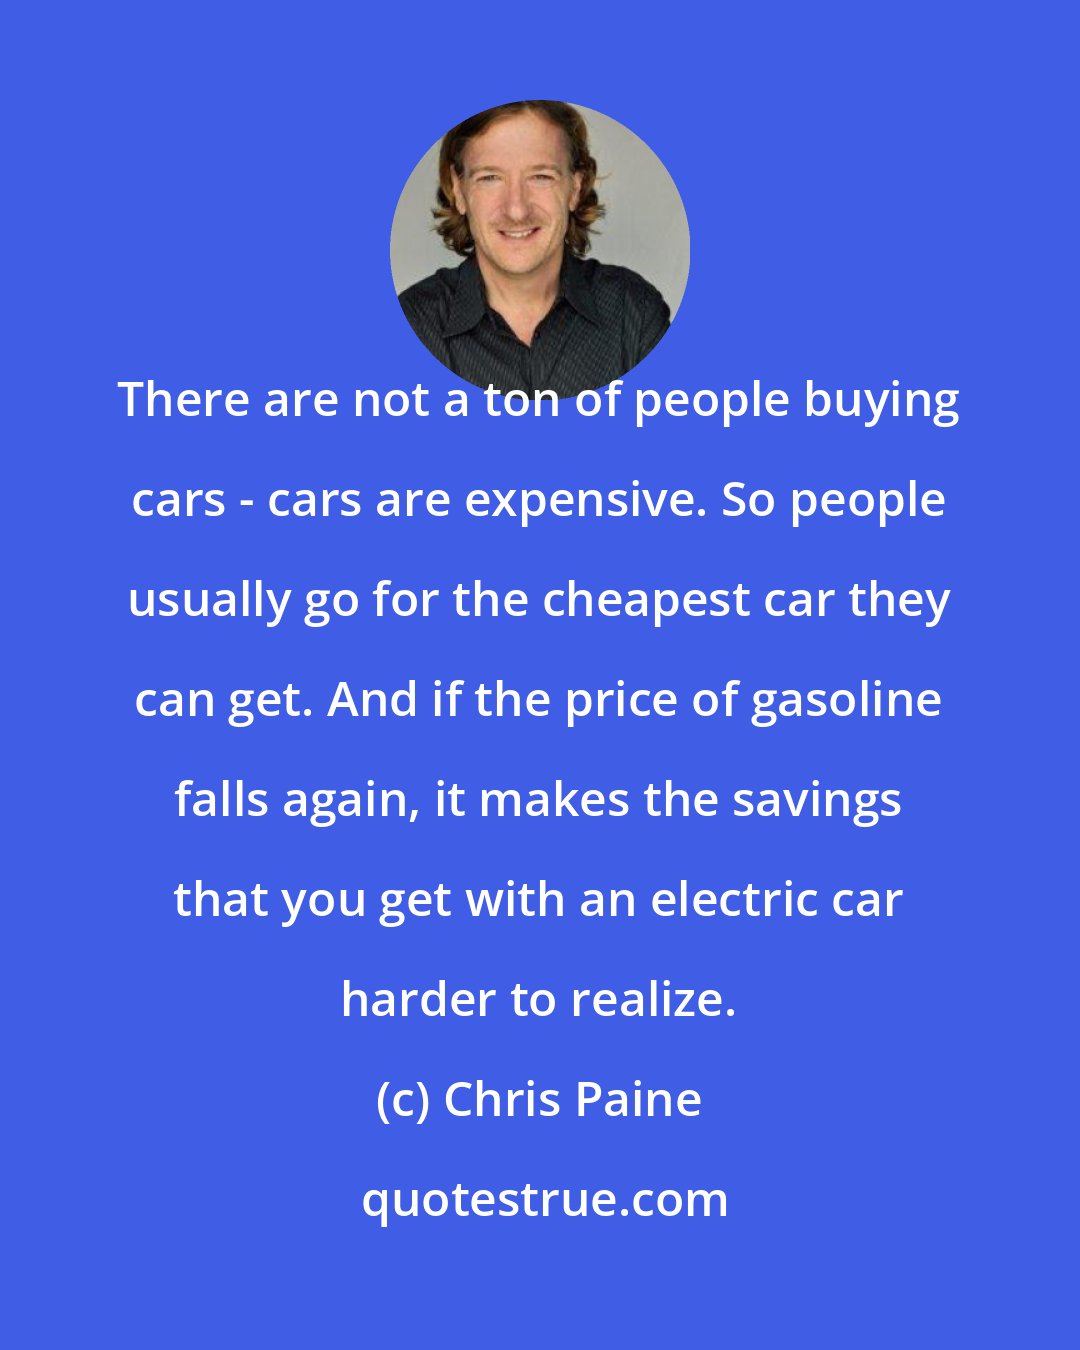 Chris Paine: There are not a ton of people buying cars - cars are expensive. So people usually go for the cheapest car they can get. And if the price of gasoline falls again, it makes the savings that you get with an electric car harder to realize.